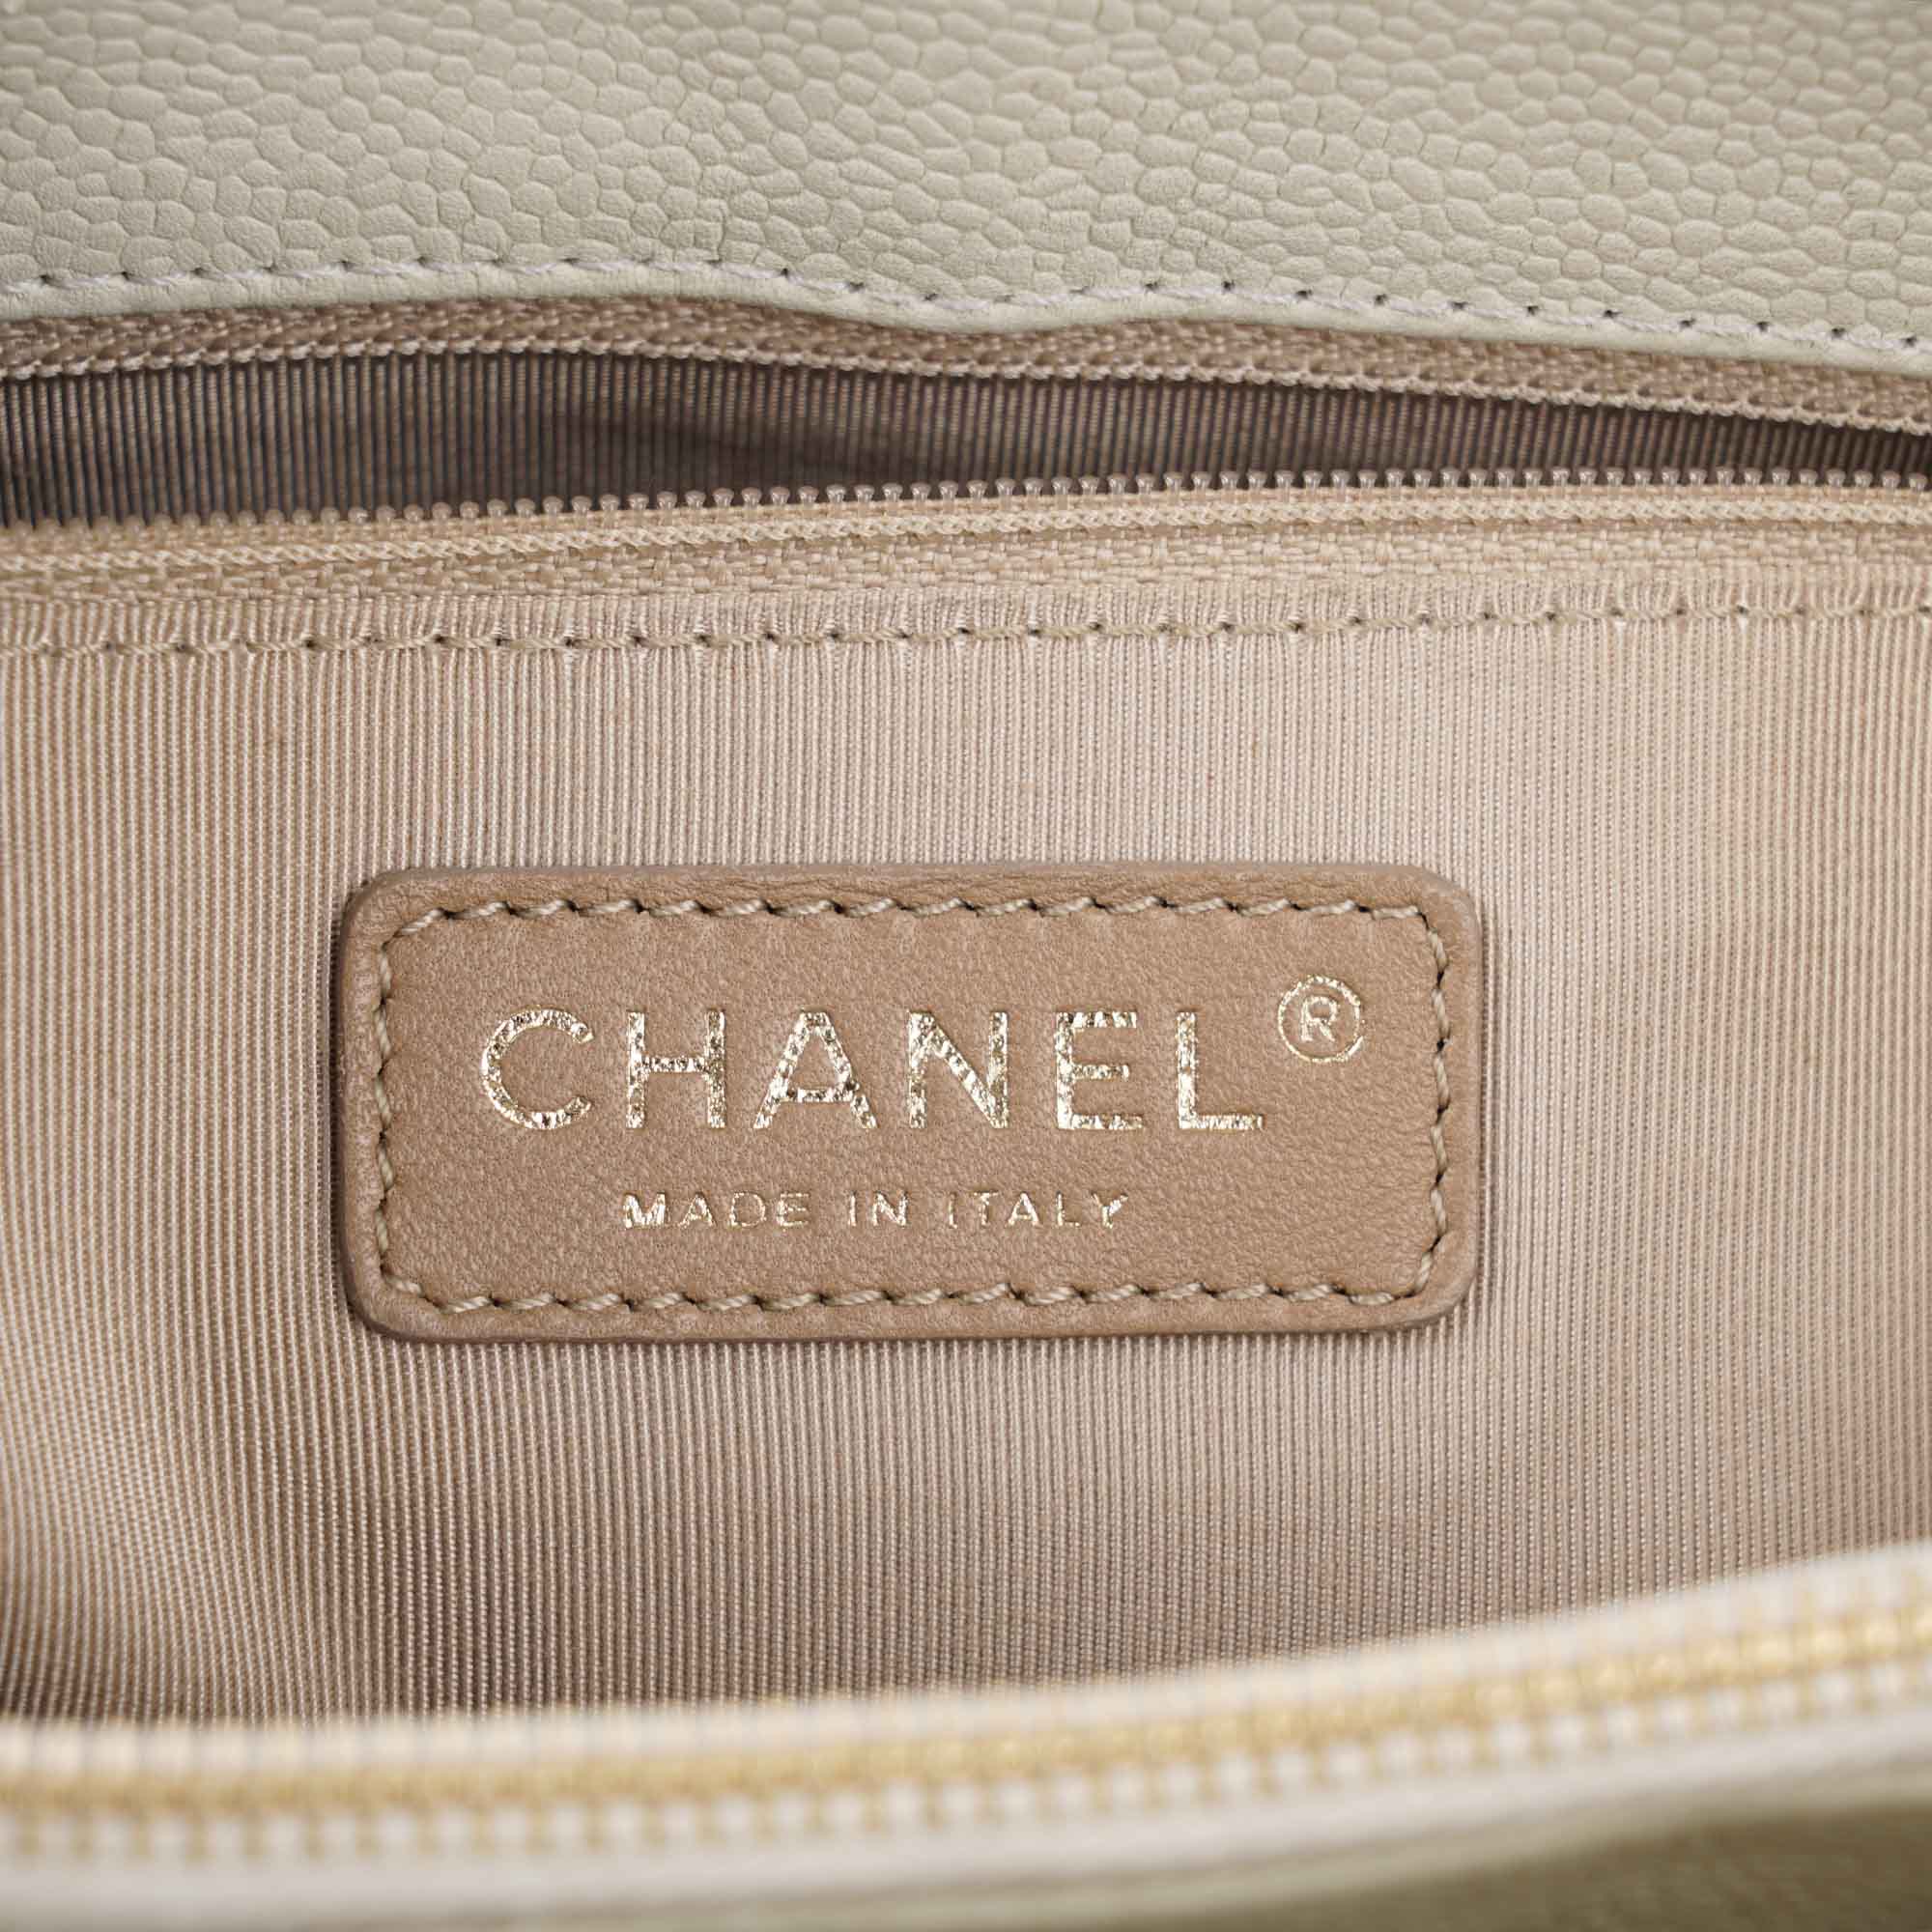 Grand Shopping Tote GST Caviar - CHANEL - Affordable Luxury image